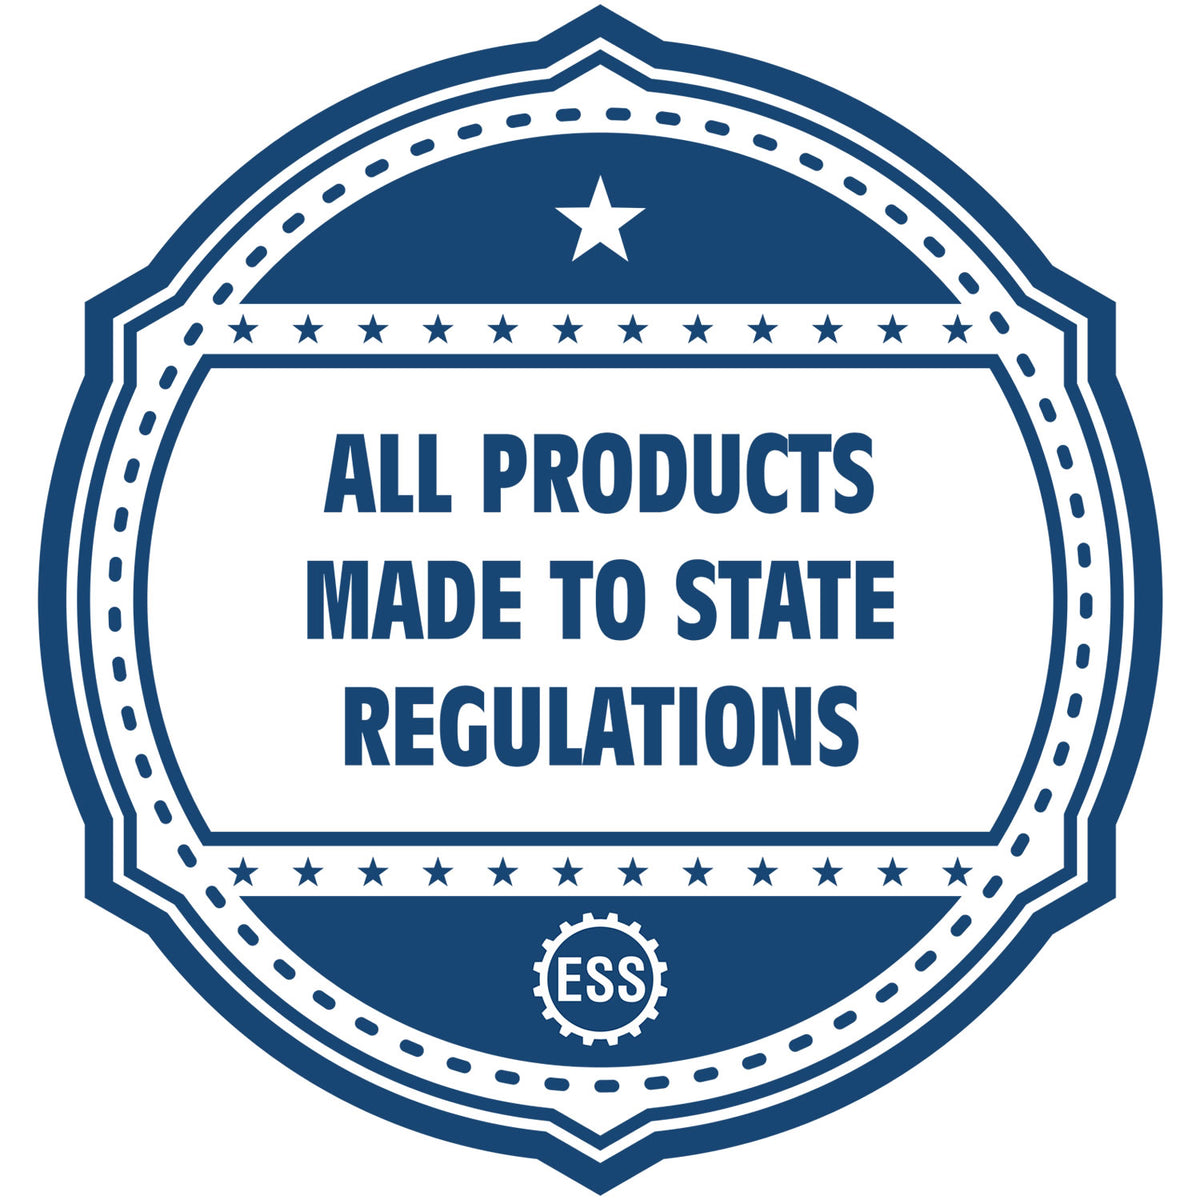 An icon or badge element for the Self-Inking Nebraska PE Stamp showing that this product is made in compliance with state regulations.